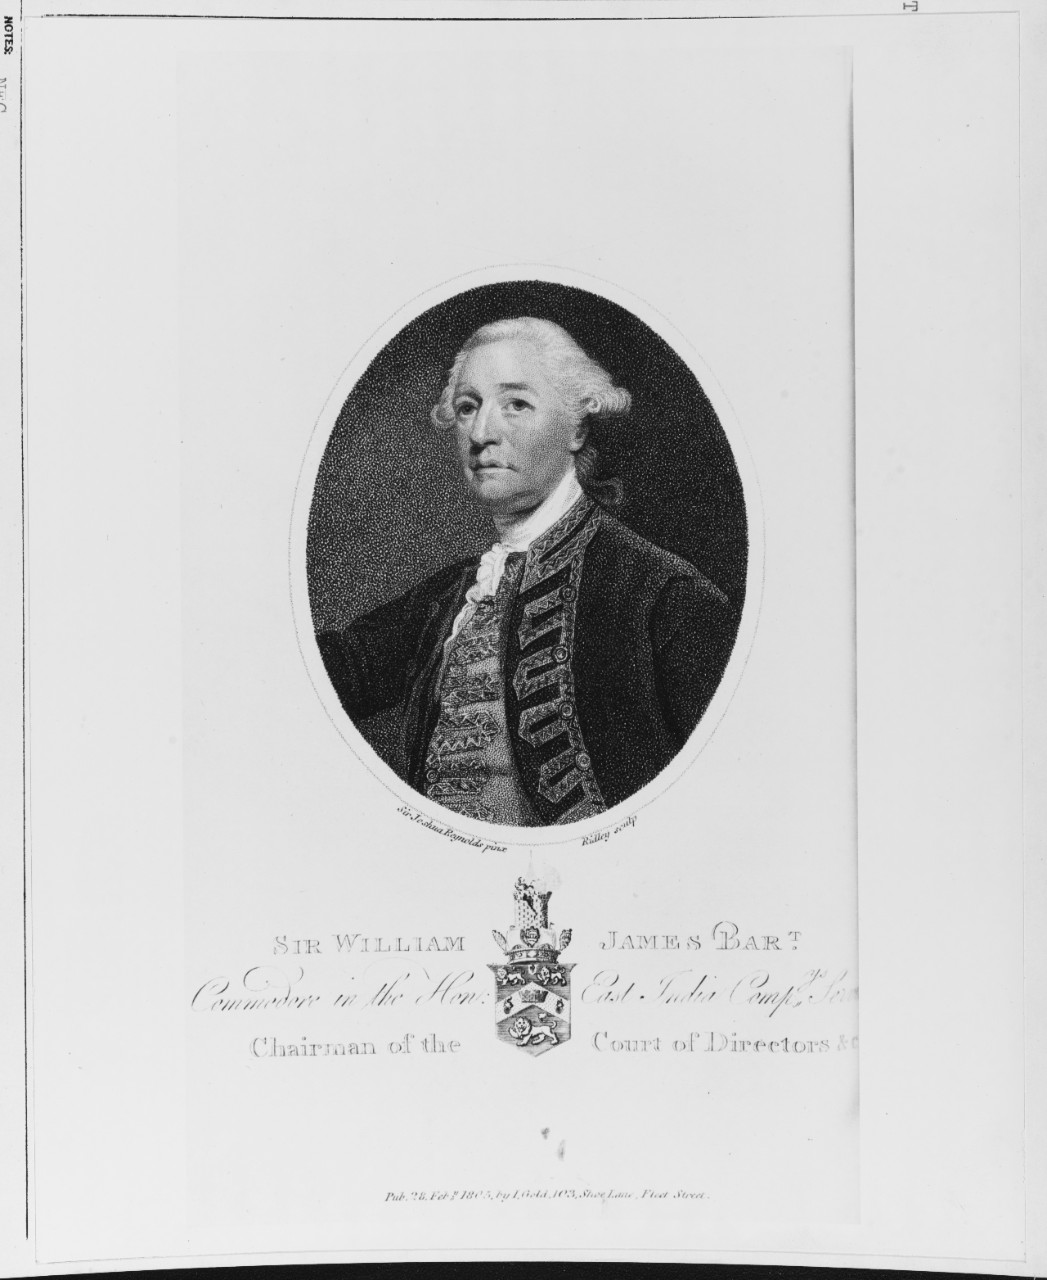 Sir William James BT (1721-1783), Commodore of the East India Company.